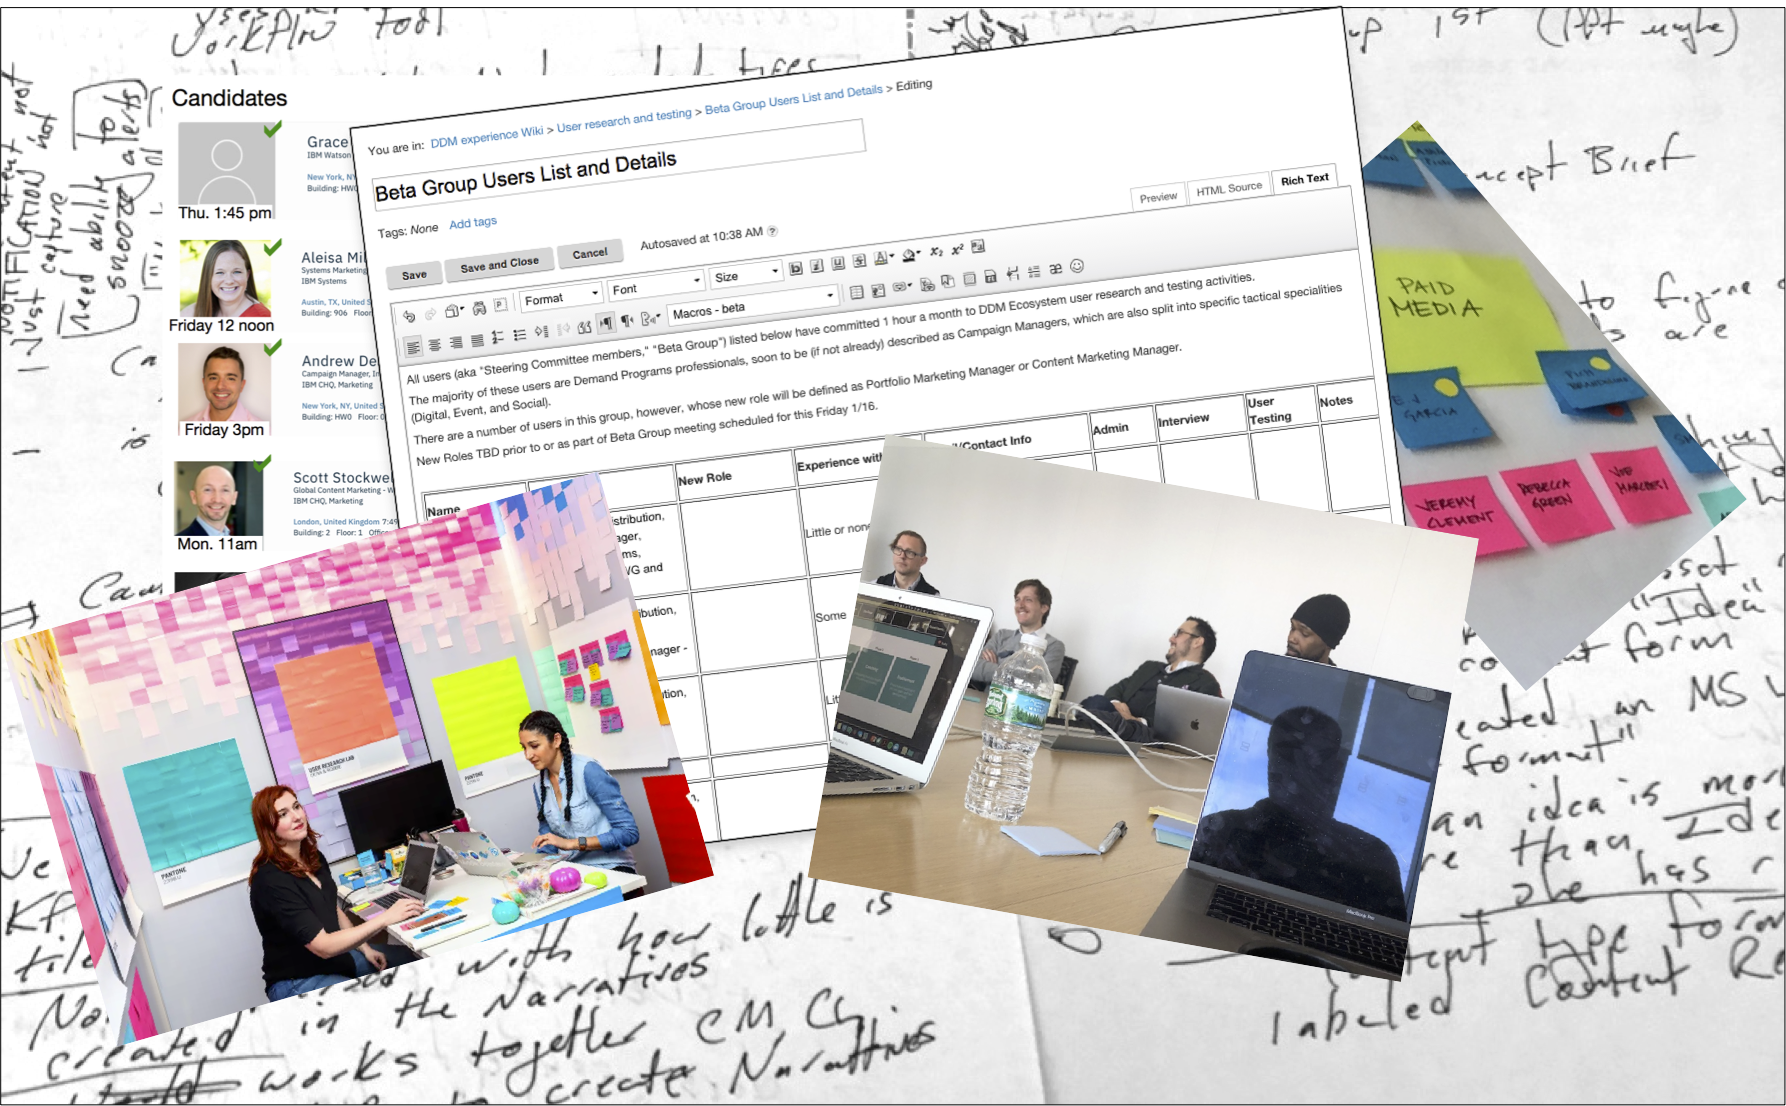 collage of user-testing-related photos, notes, forms, and schedules